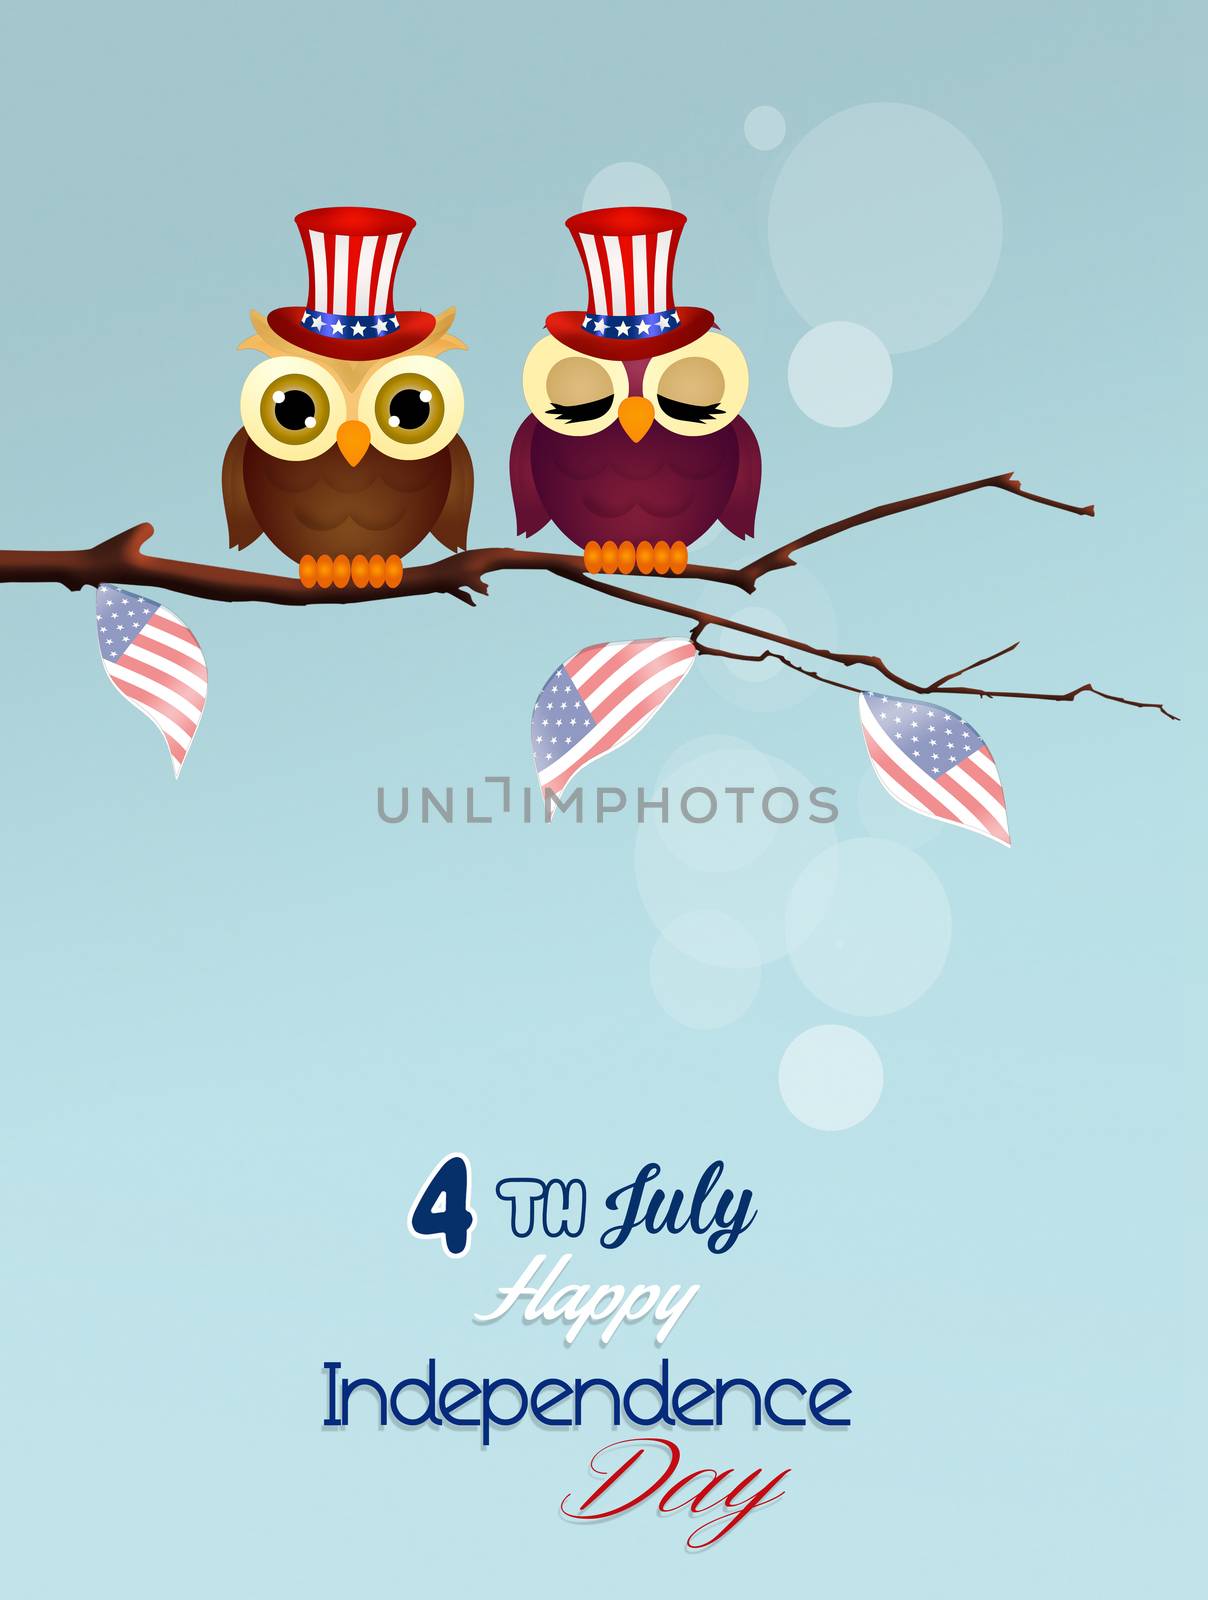 Independence Day, 4th of July